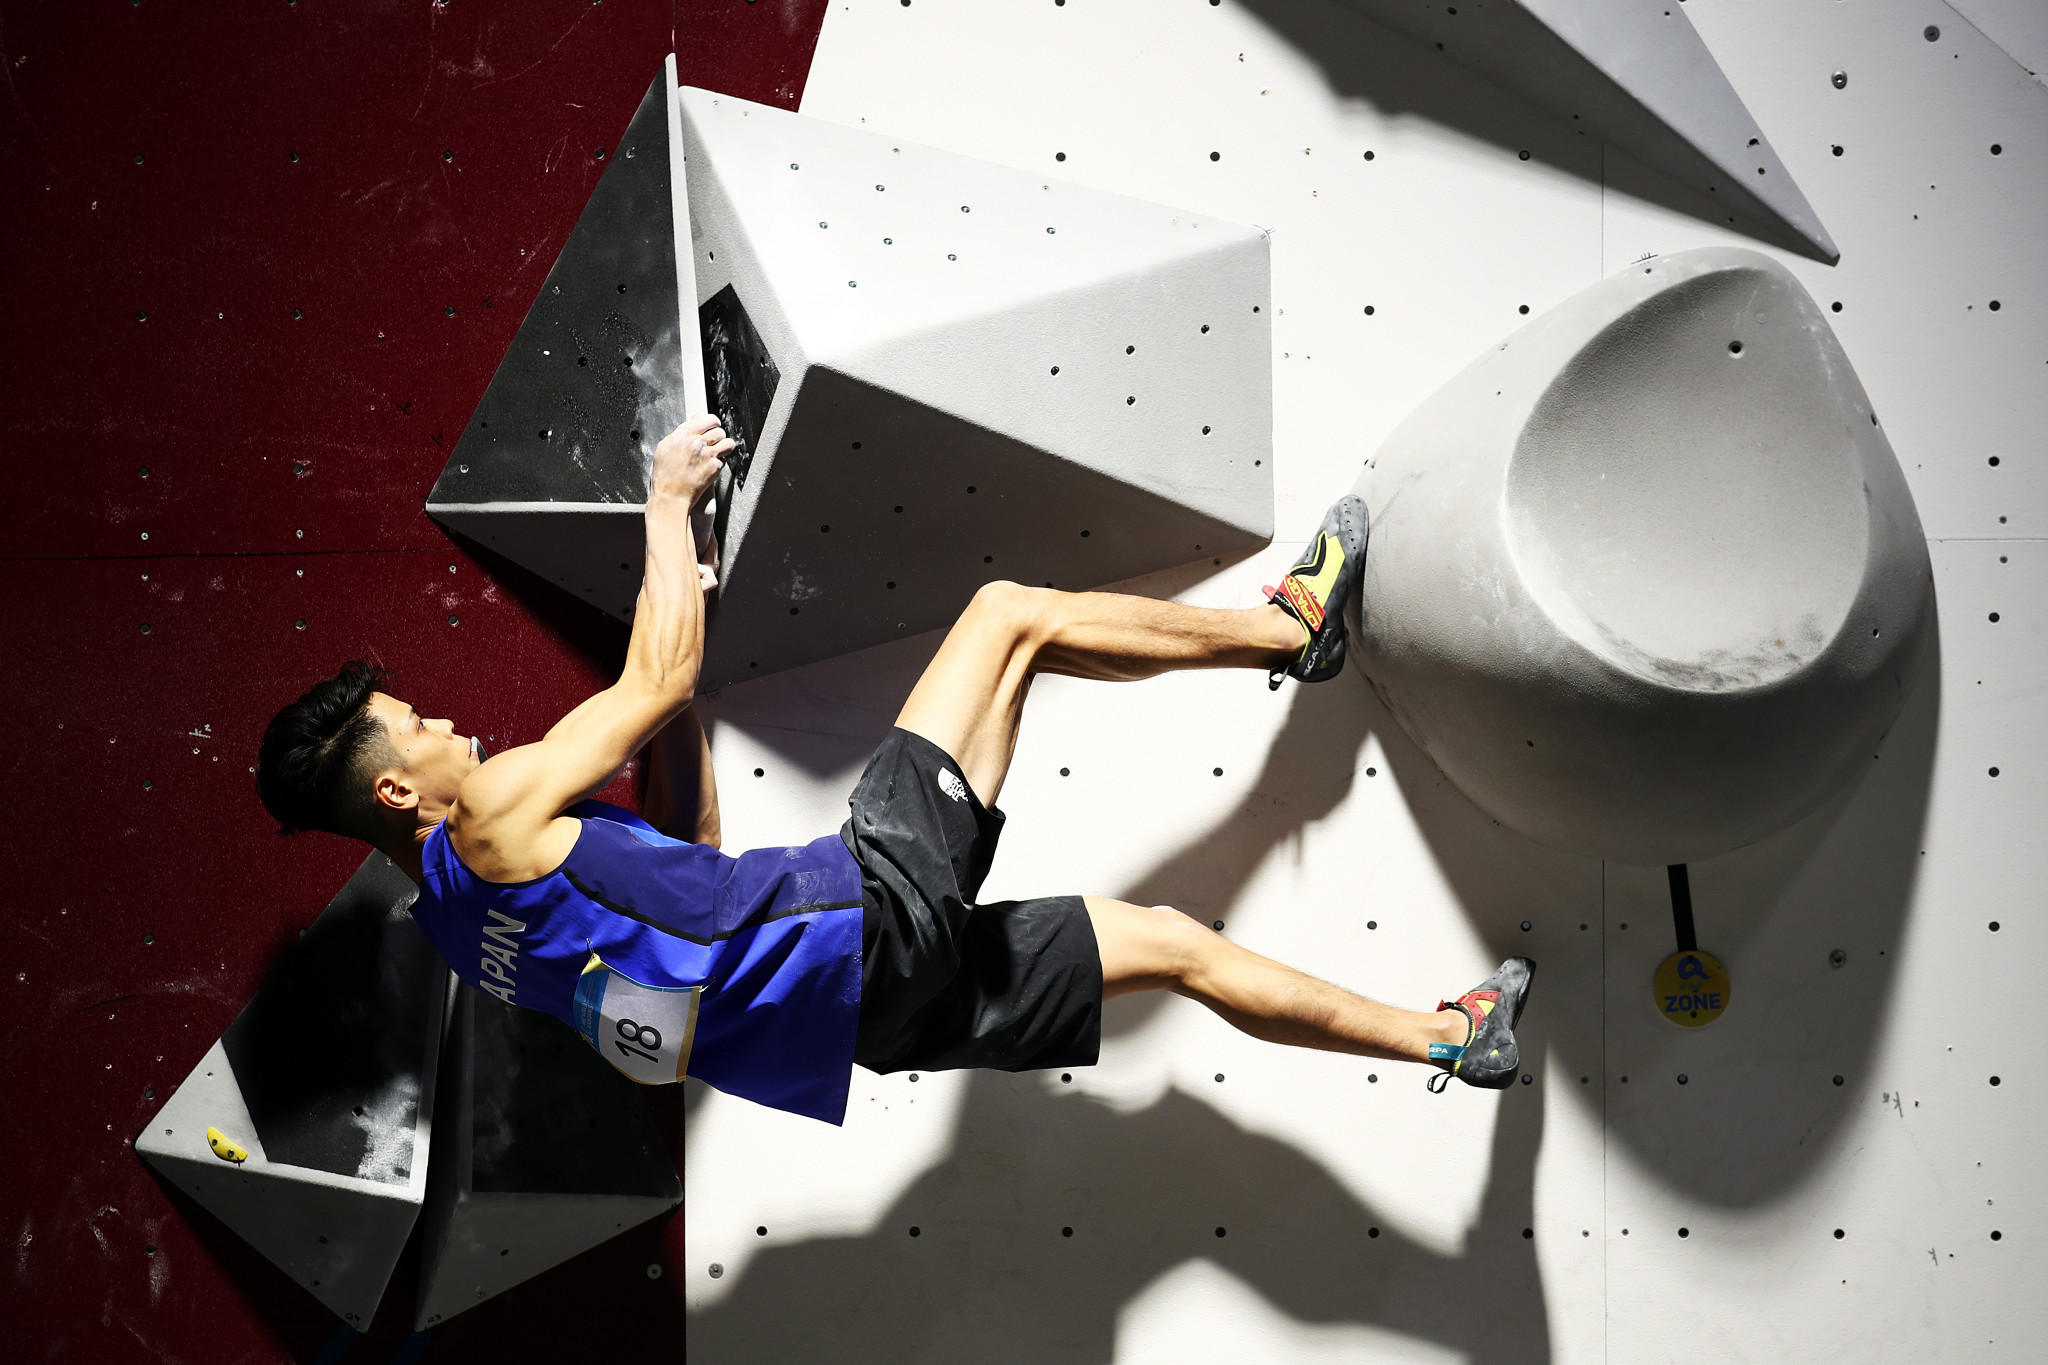 Bouldering featured at the first World Beach Games in Doha ©Getty Images